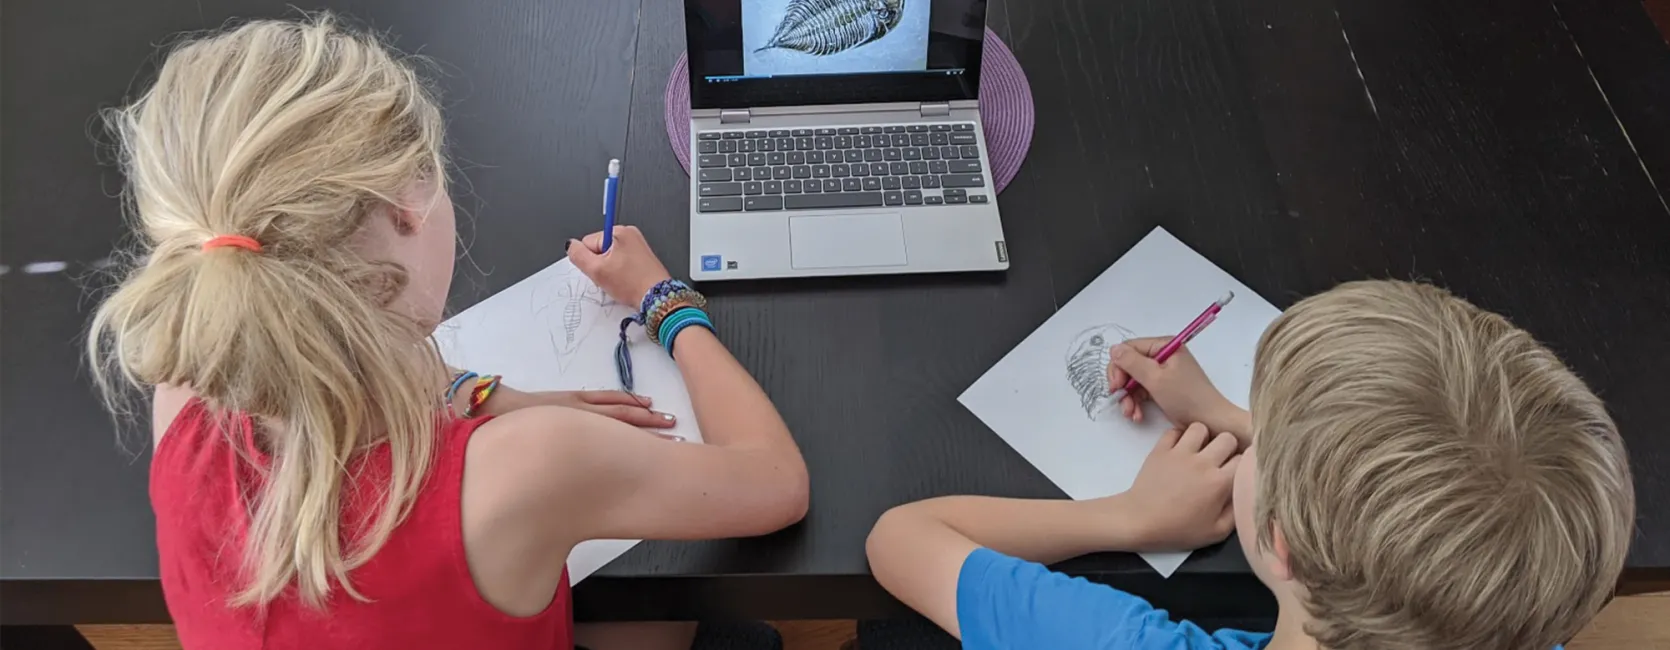 A girl and boy sitting at a table, drawing a fossil that is shown on the laptop in front of them.